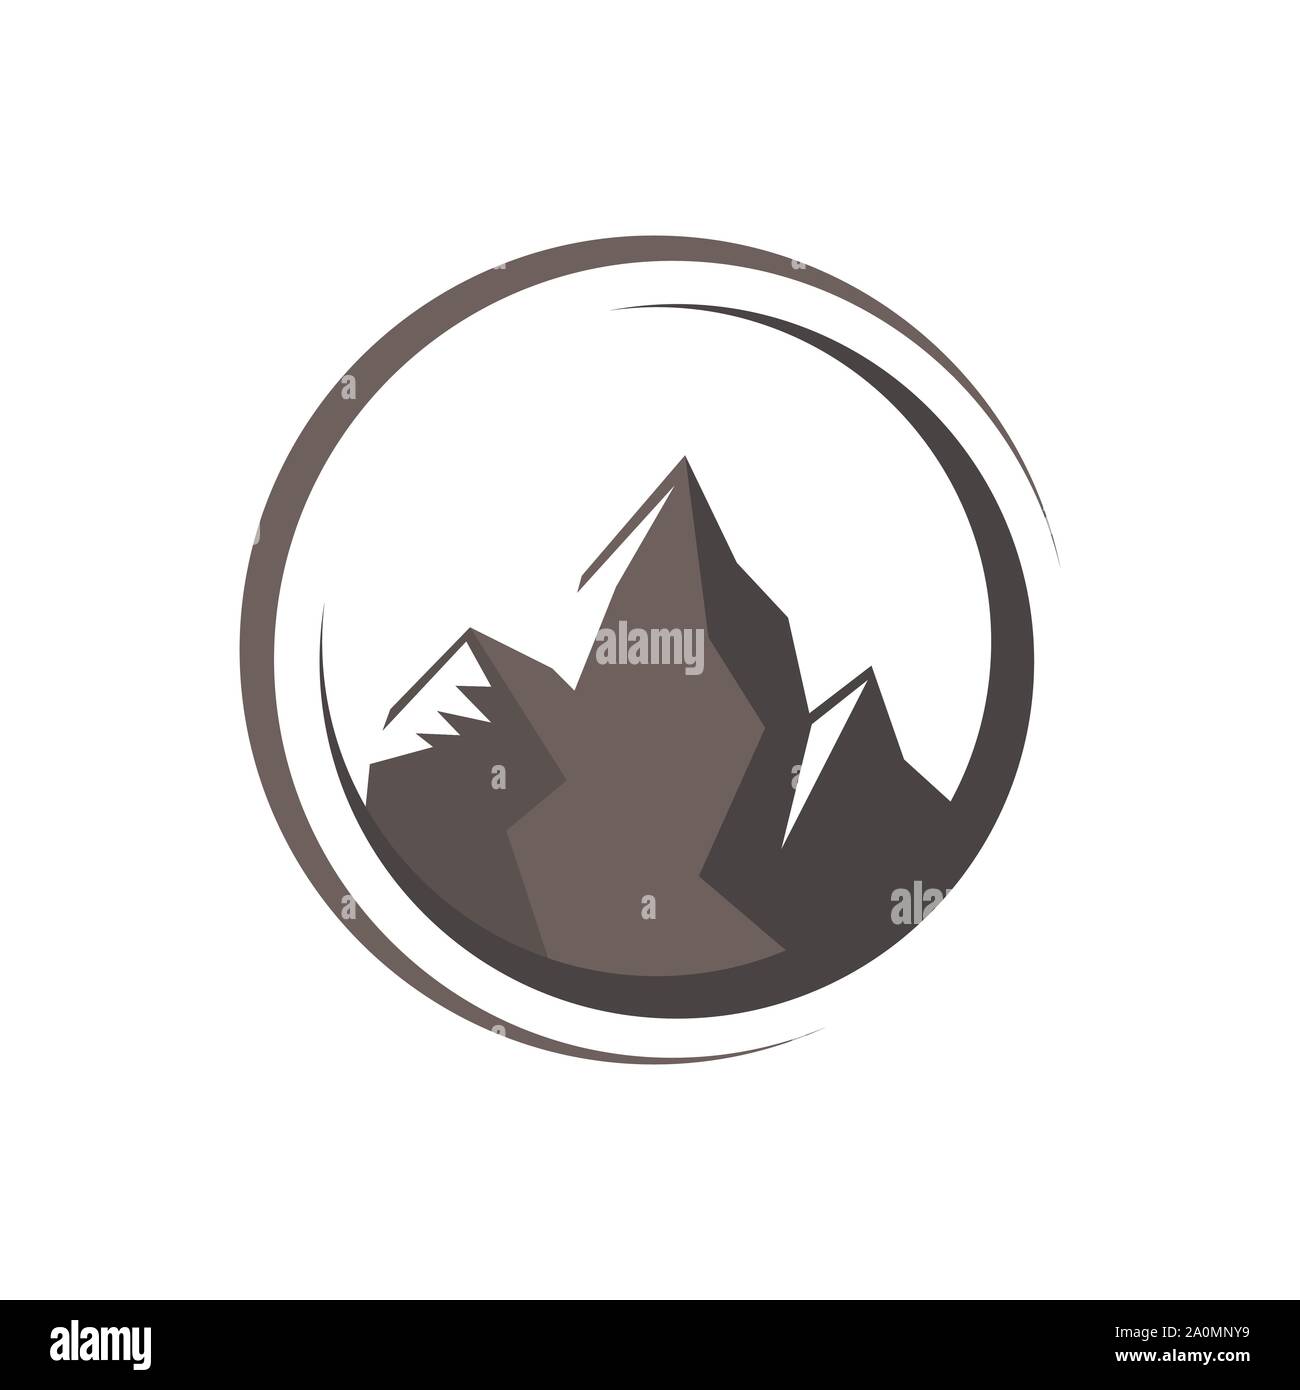 circle curve with Simple Mountain logo design vector illustration Stock Vector